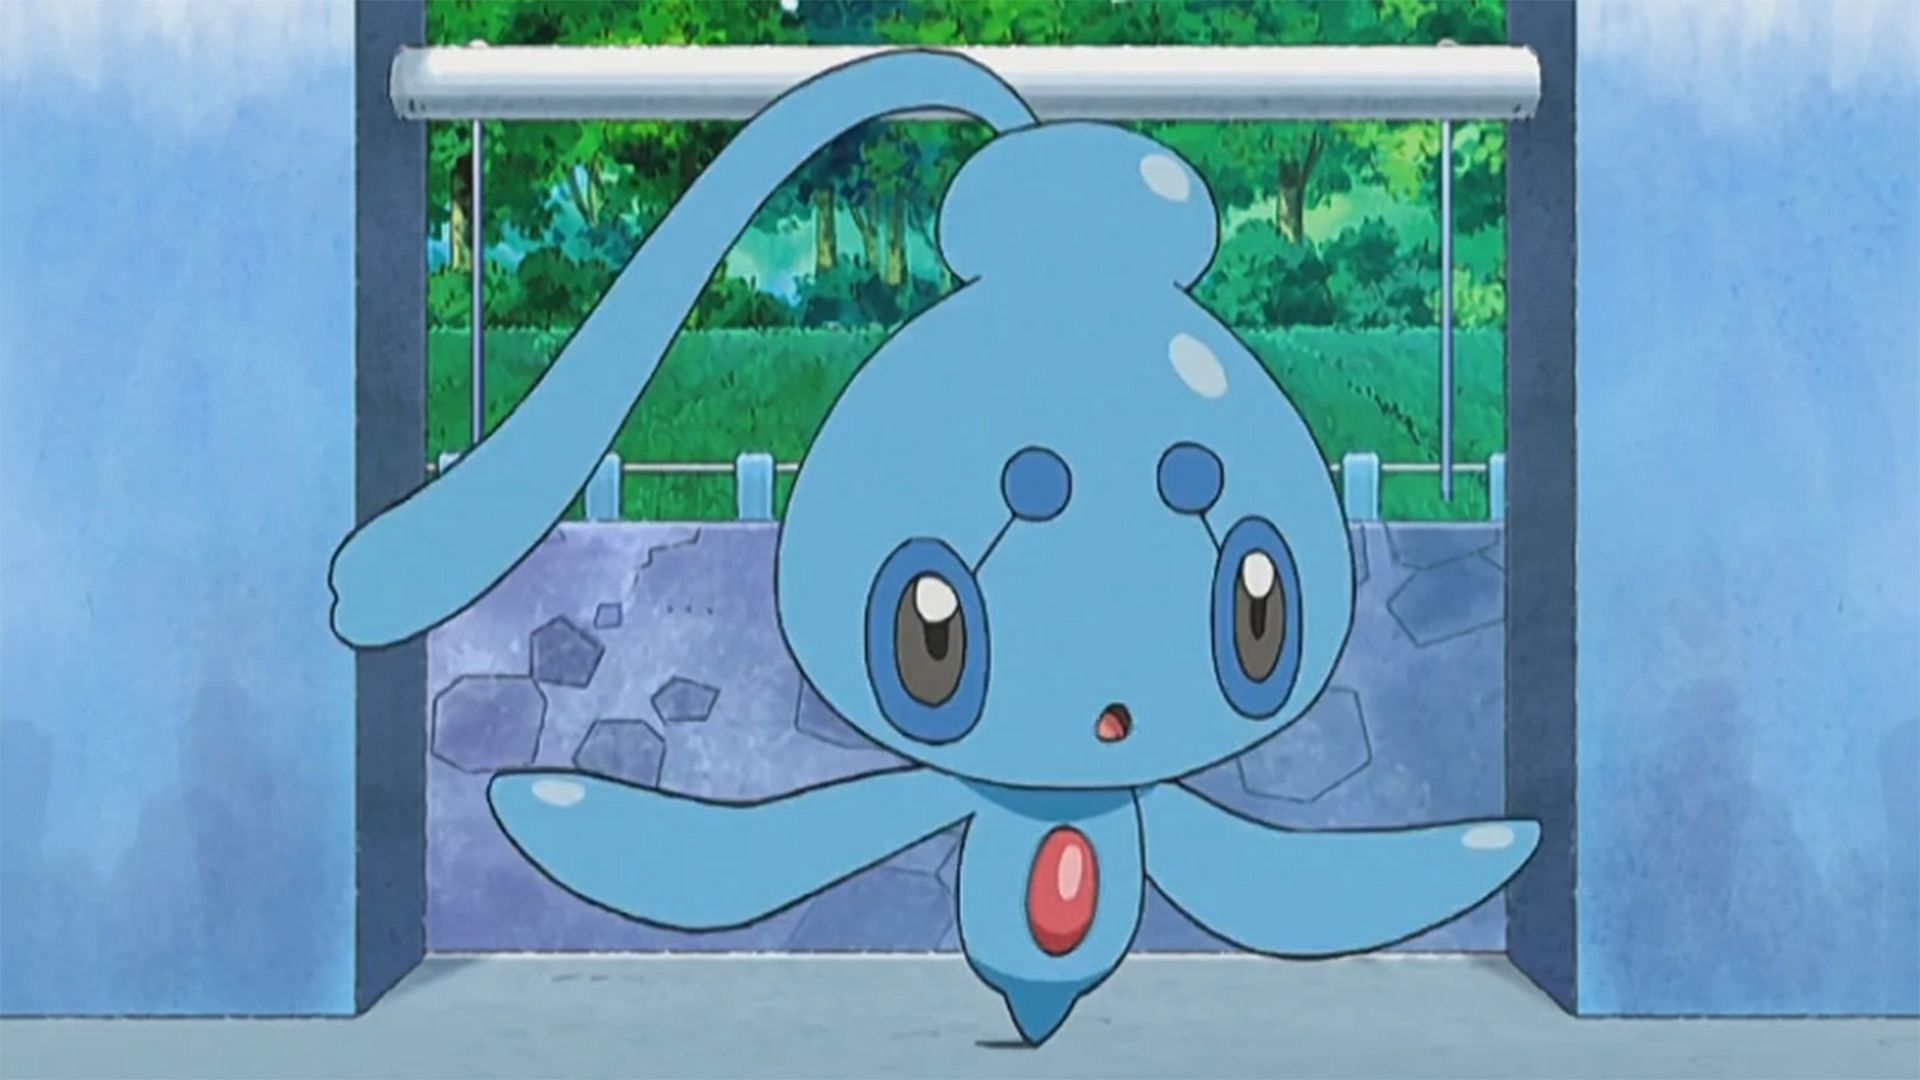 Phione as it appers in the anime (Image via The Pokemon Company)